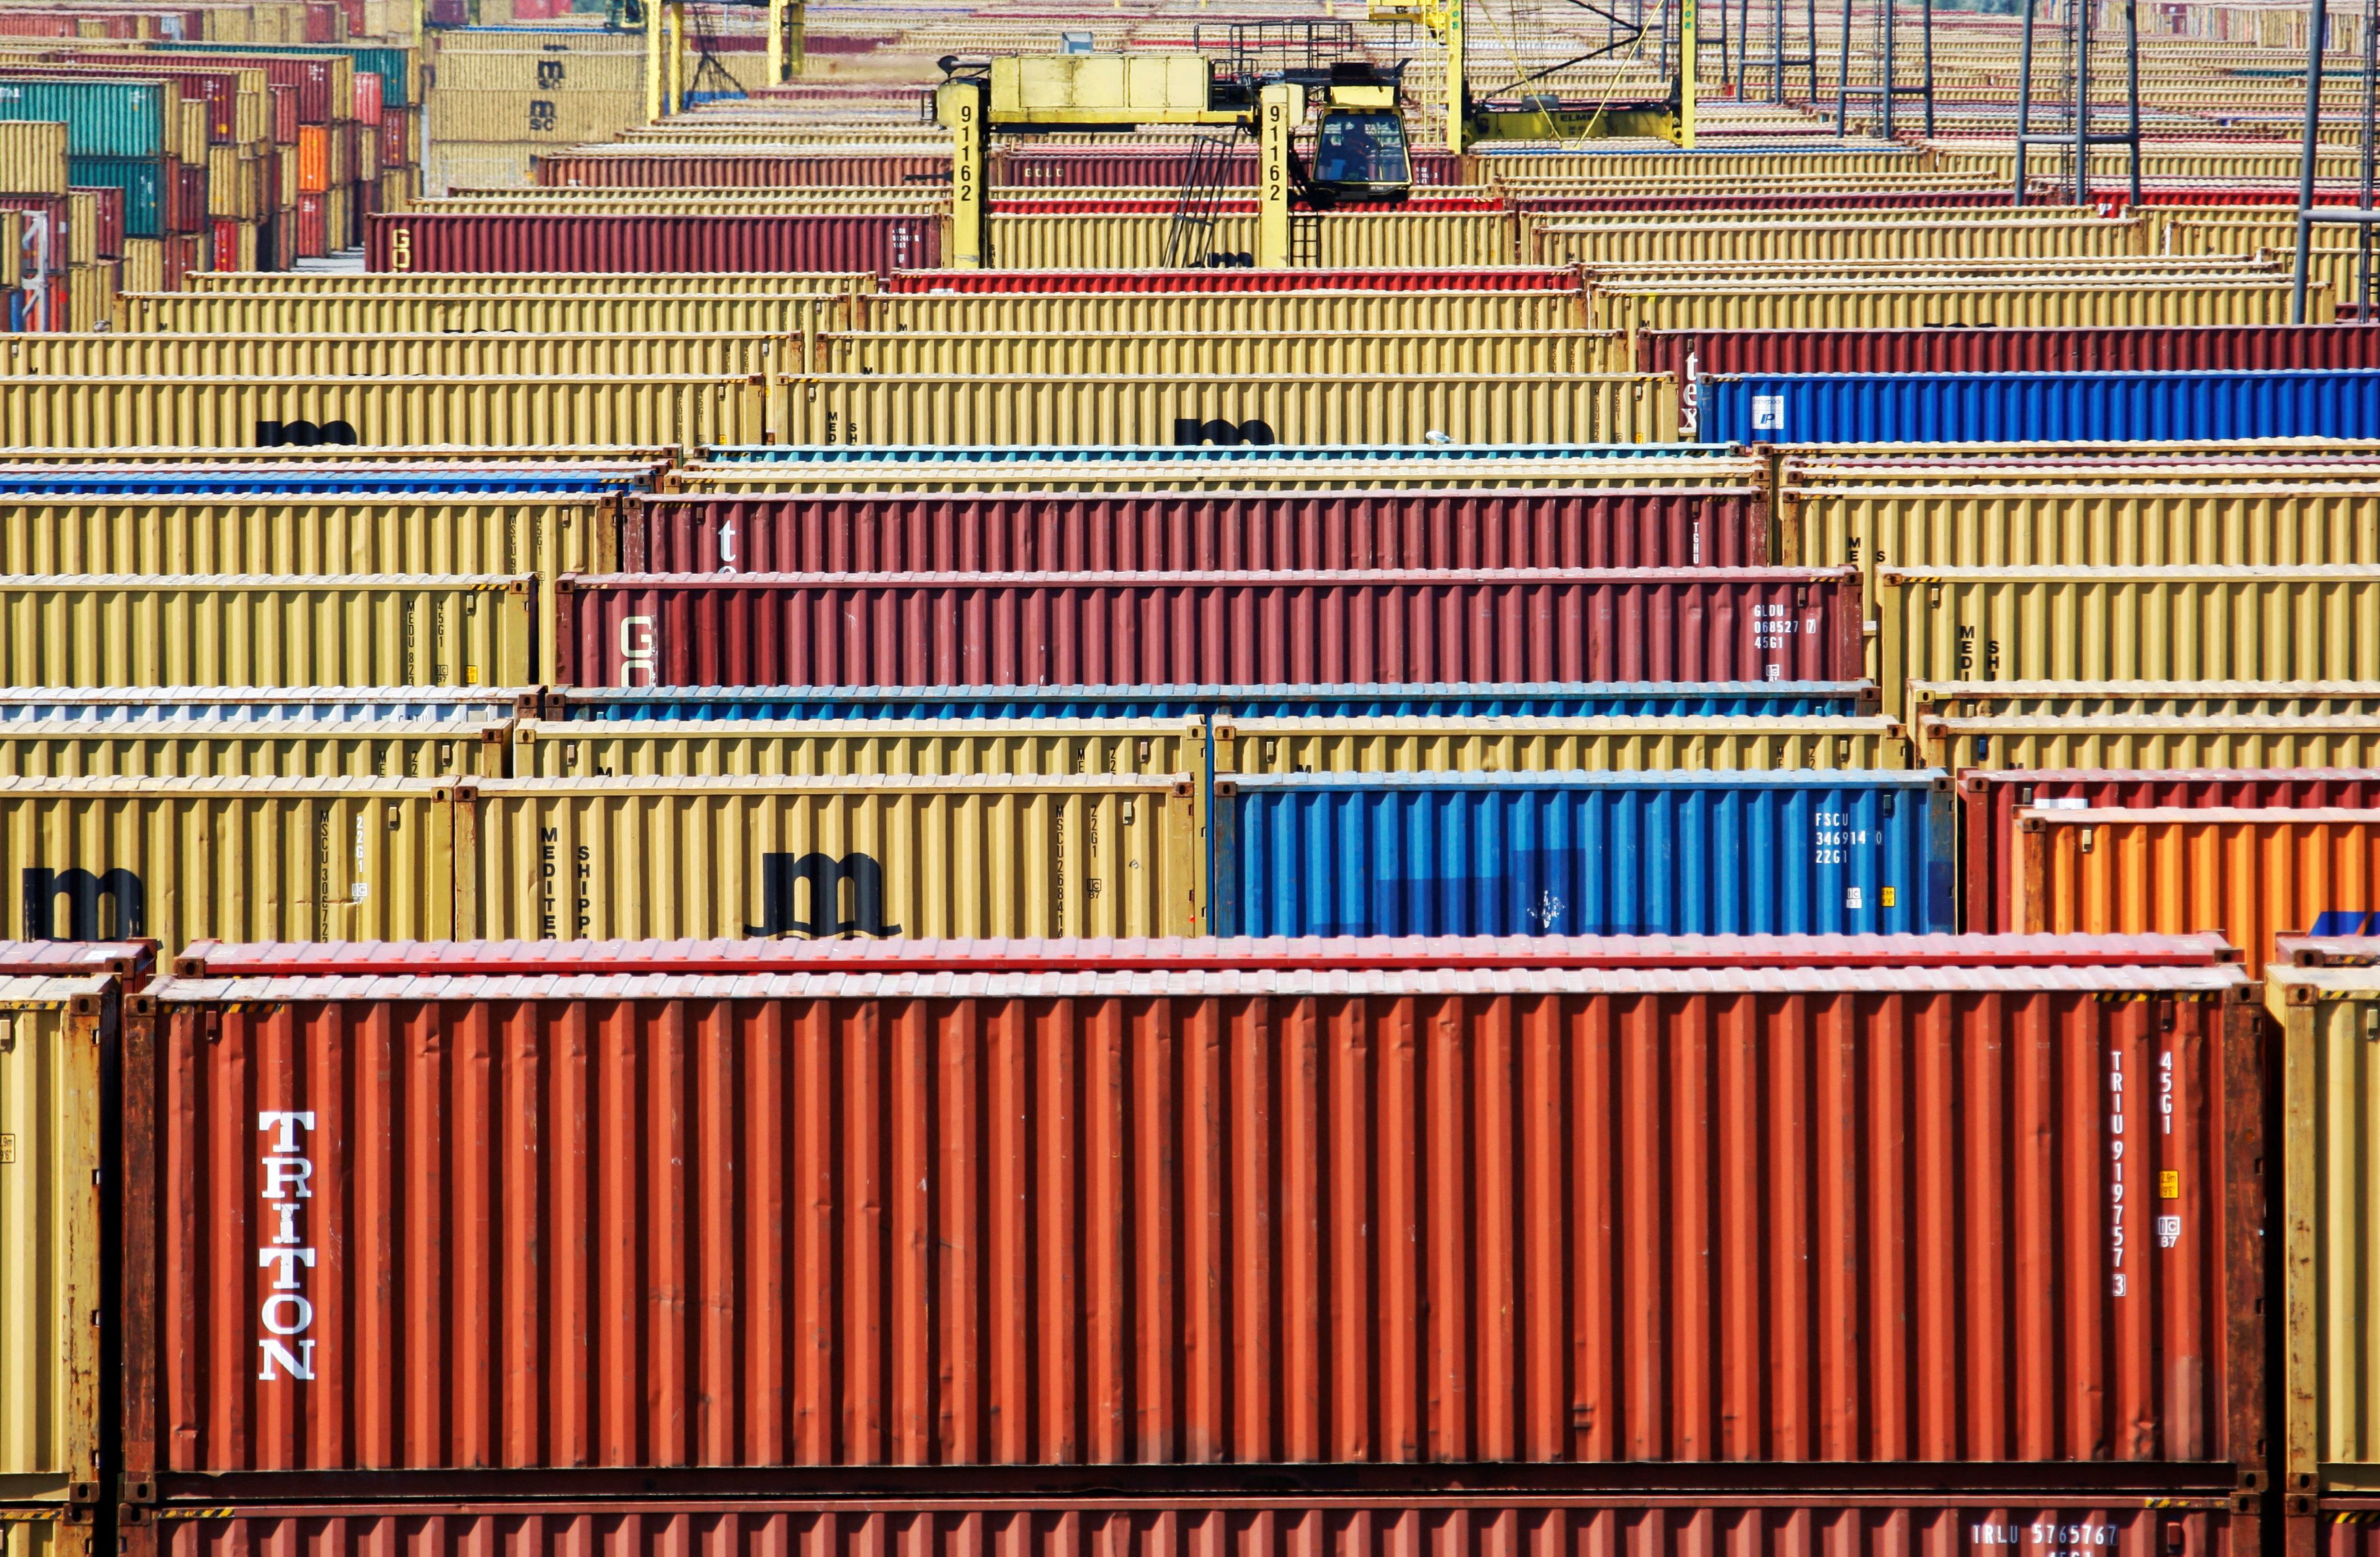 Containers are parked in the port of Antwerp